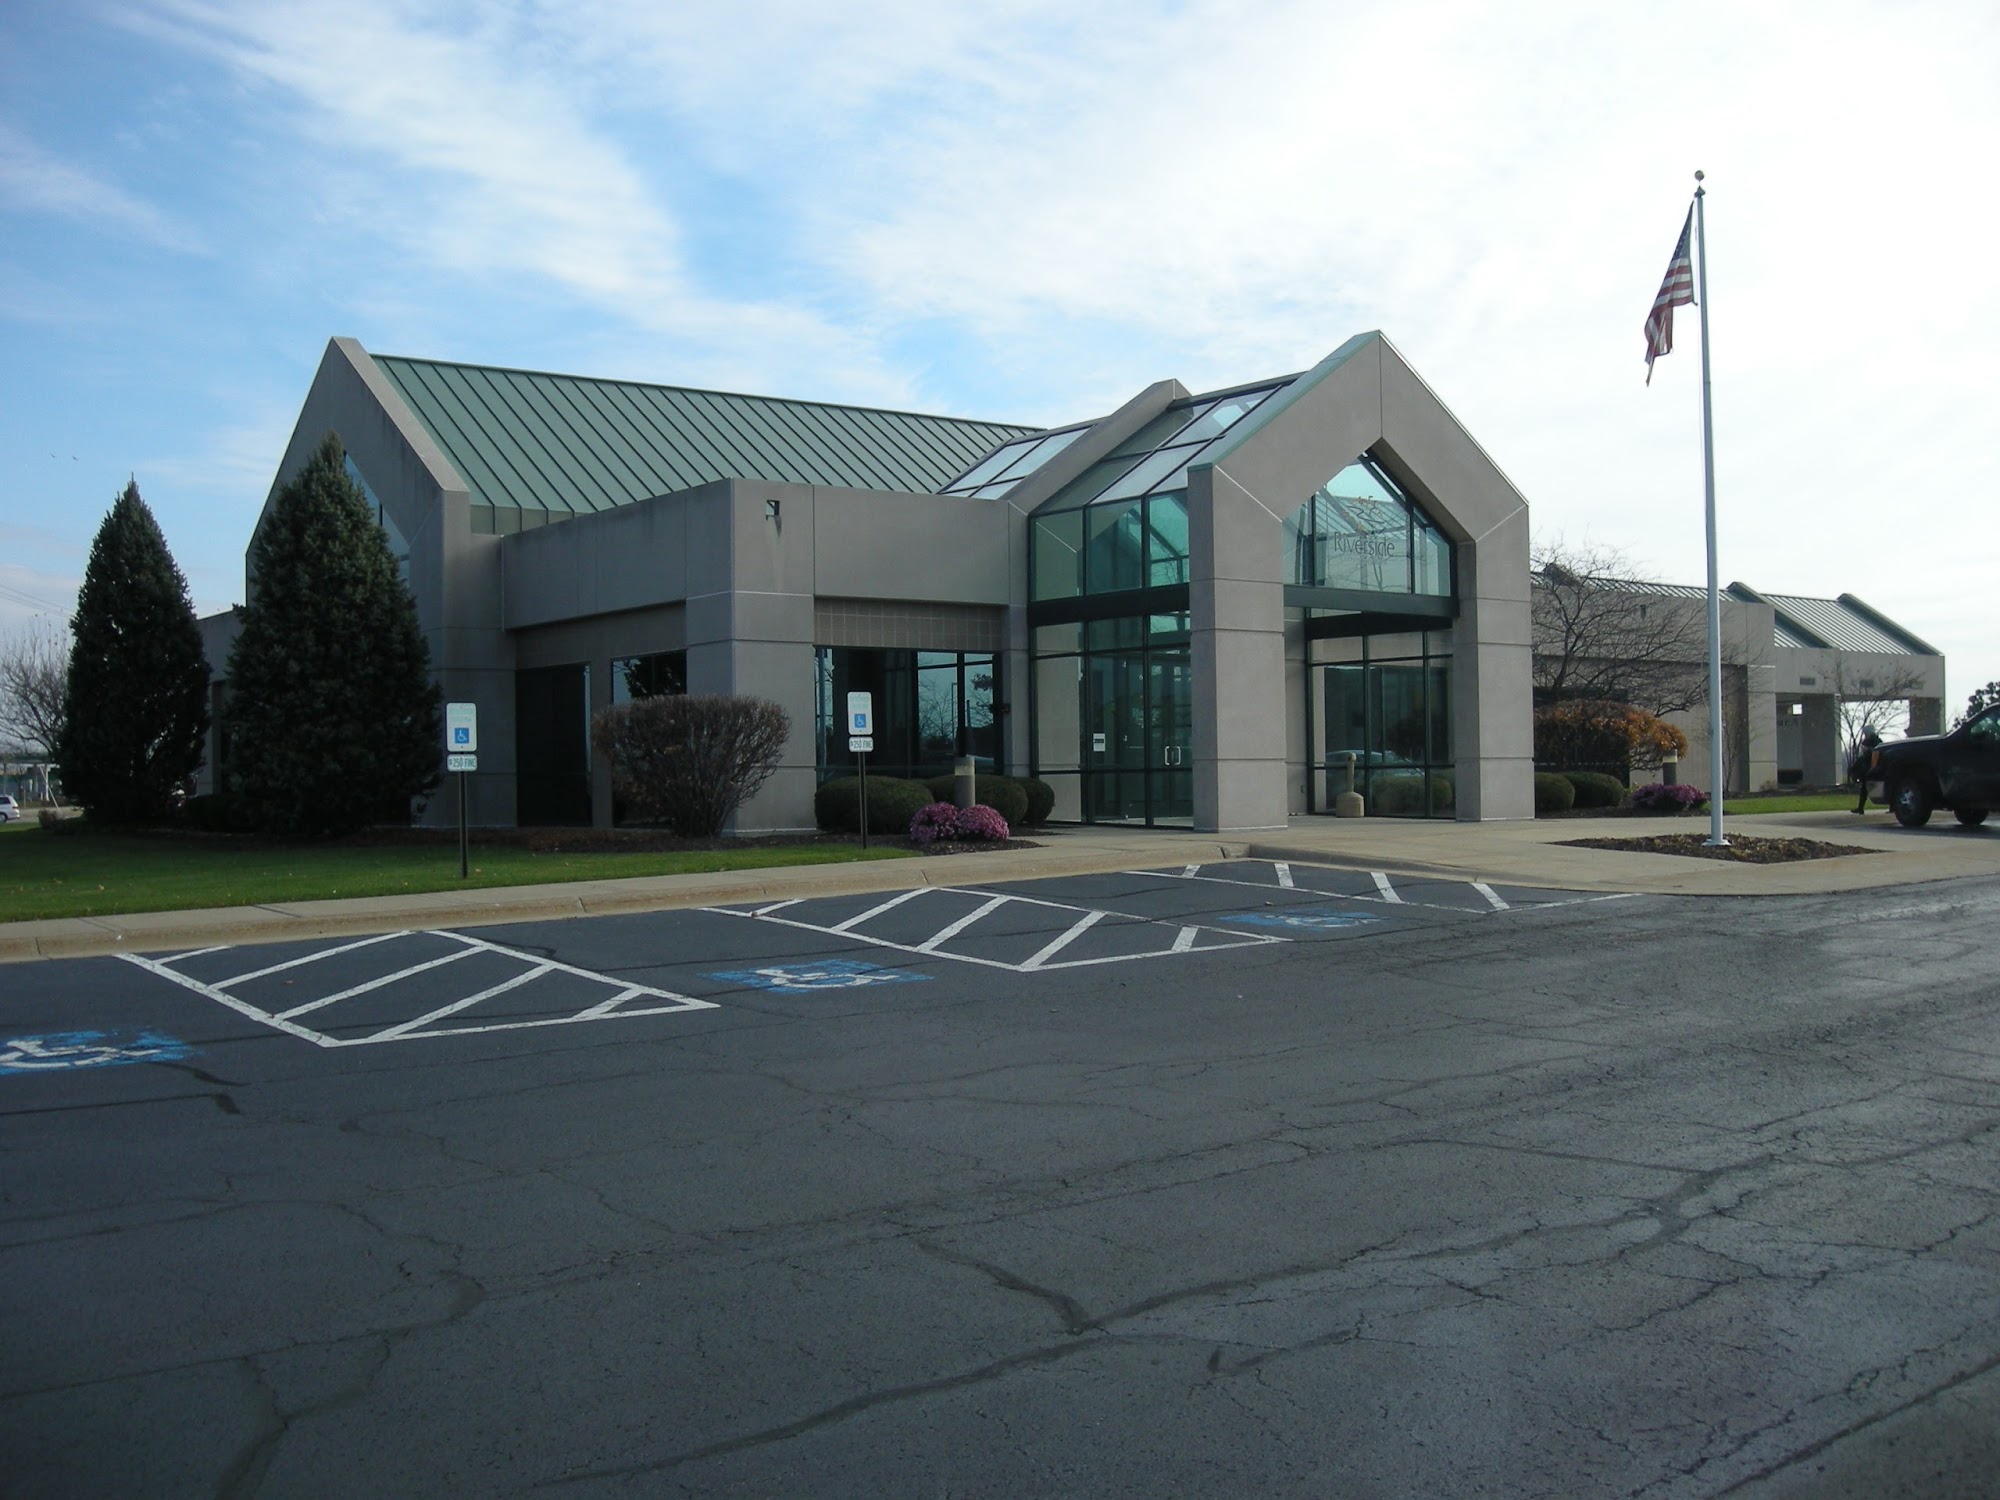 Illinois Bank & Trust, a division of HTLF Bank